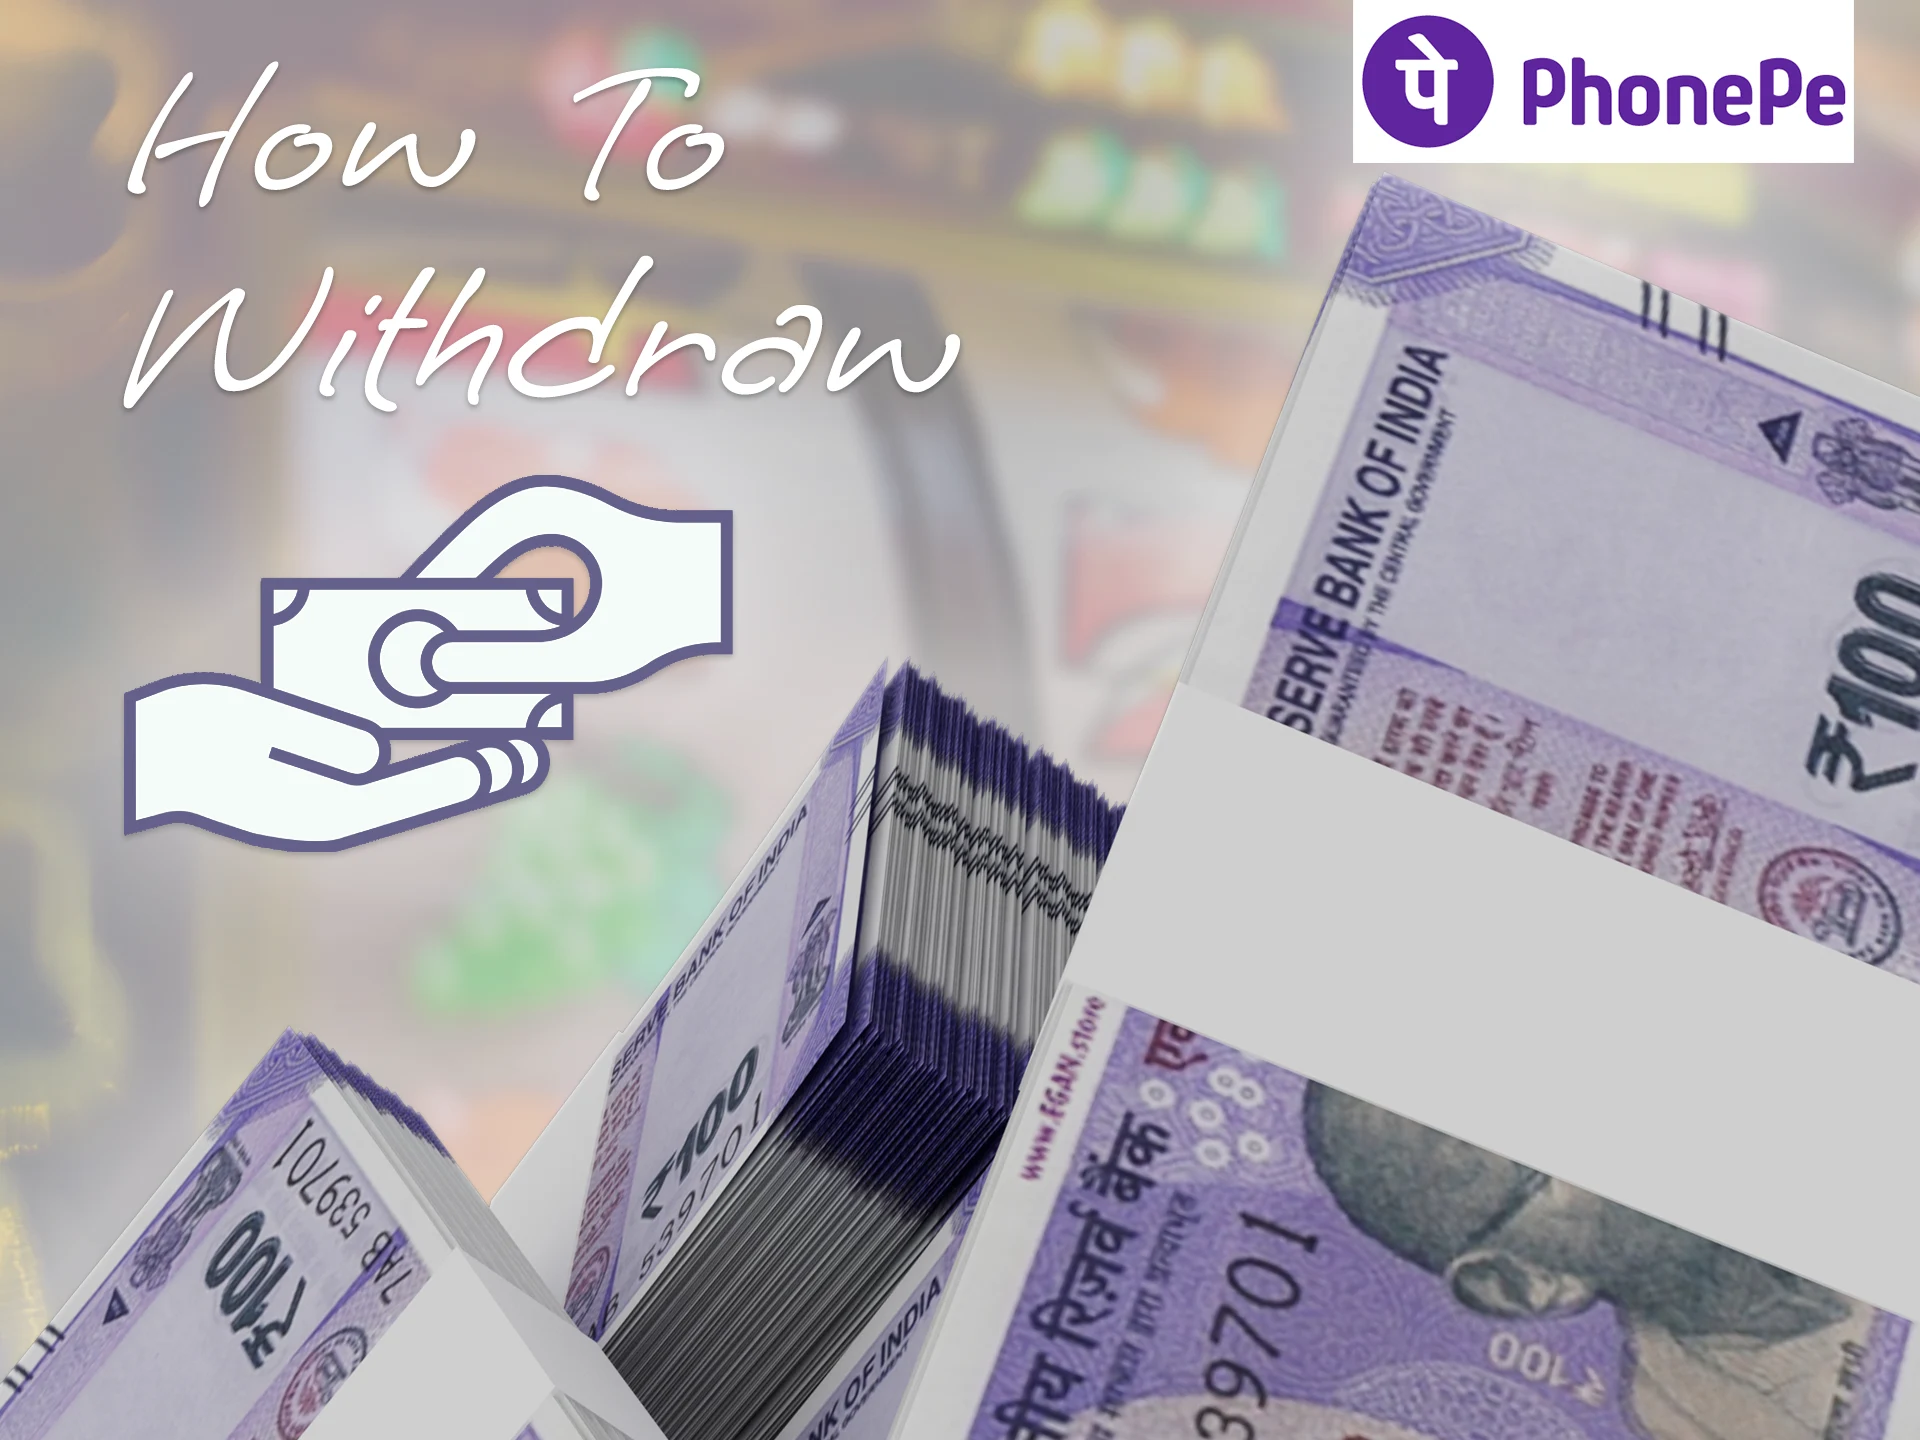 Withdraw money from your gaming account using the PhonePe payment system.